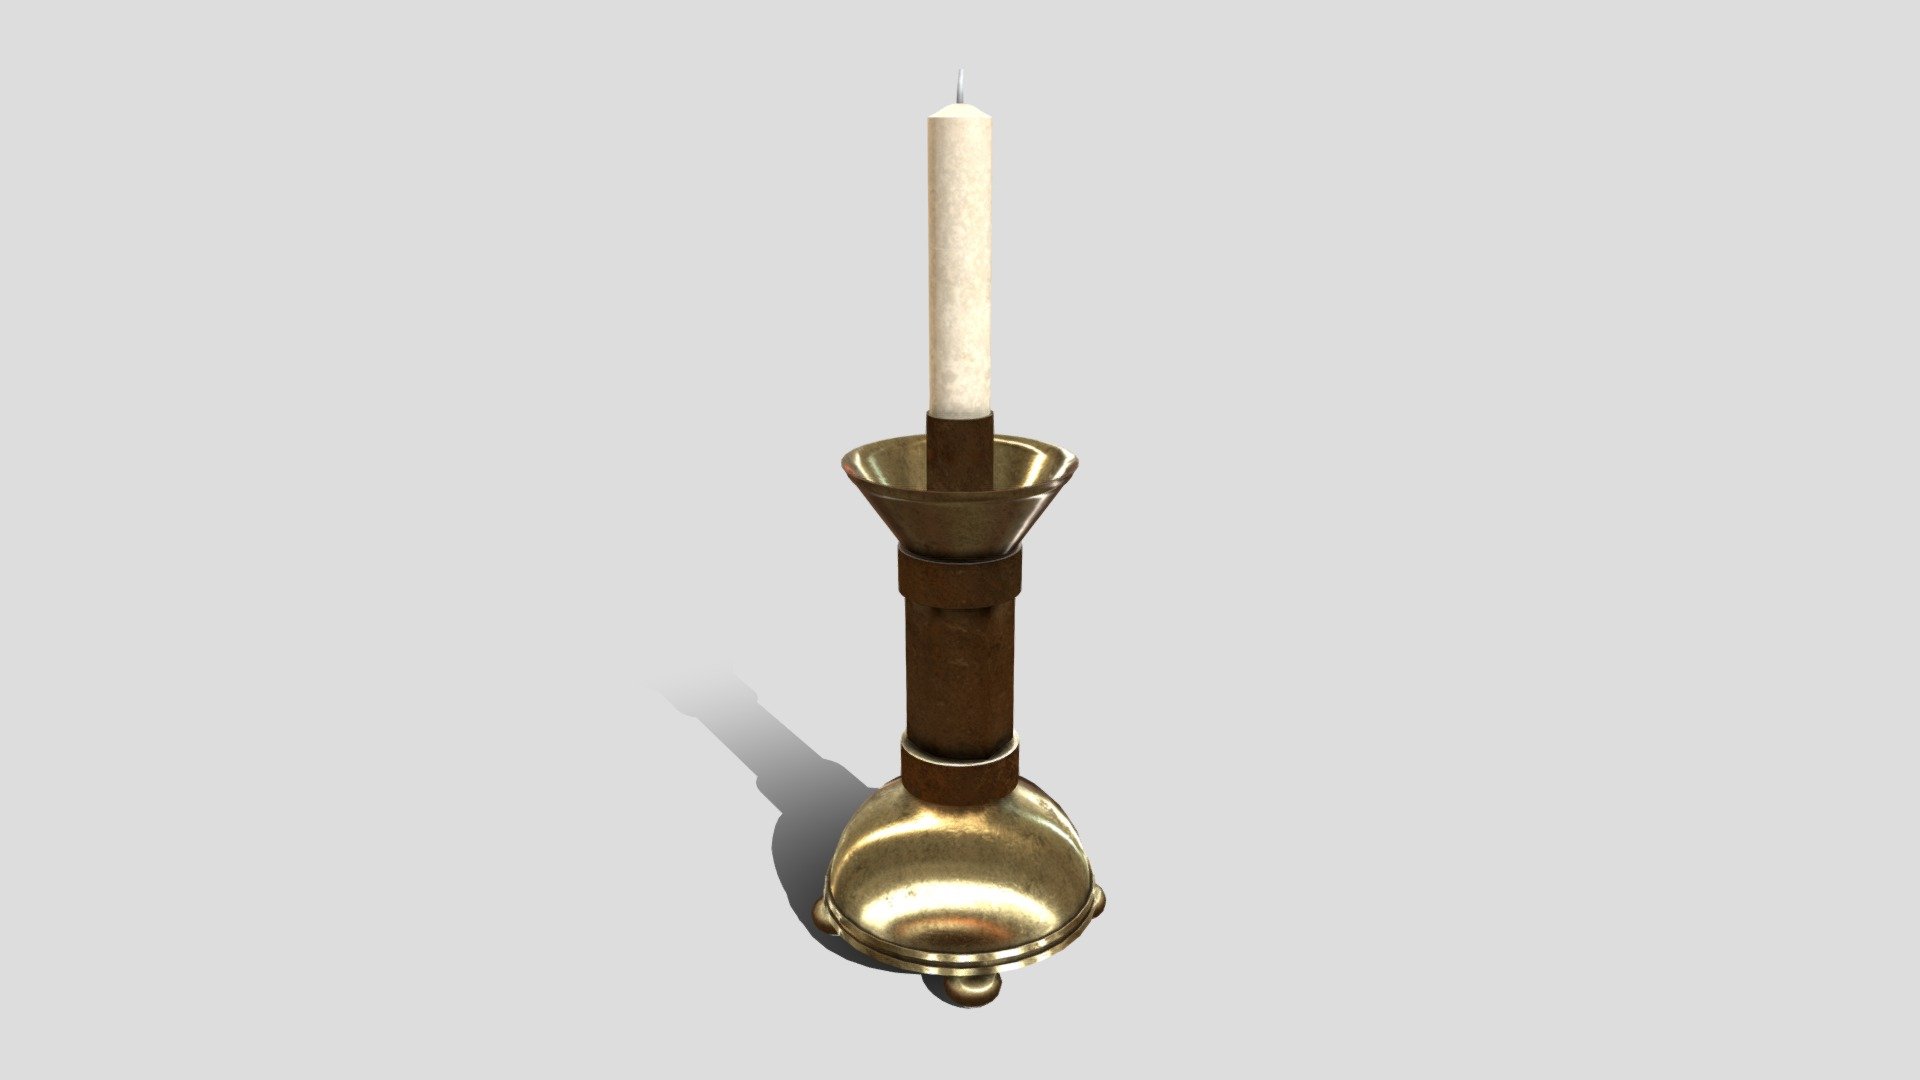 Low-Poly, Game-ready, hand-painted, PBR - Medieval Altar Candlestick

Based on 11/ 12th century English Altar Sticks.

Candle object and candlestick are separate objects so you can use one with or without the other if desired.

Textures 2048 x 2048, OpenGL, Dilation + Background, 8-Pixel Padding

Ideally suited for Medieval/ Fantasty/ Church/ Religious environments 3d model